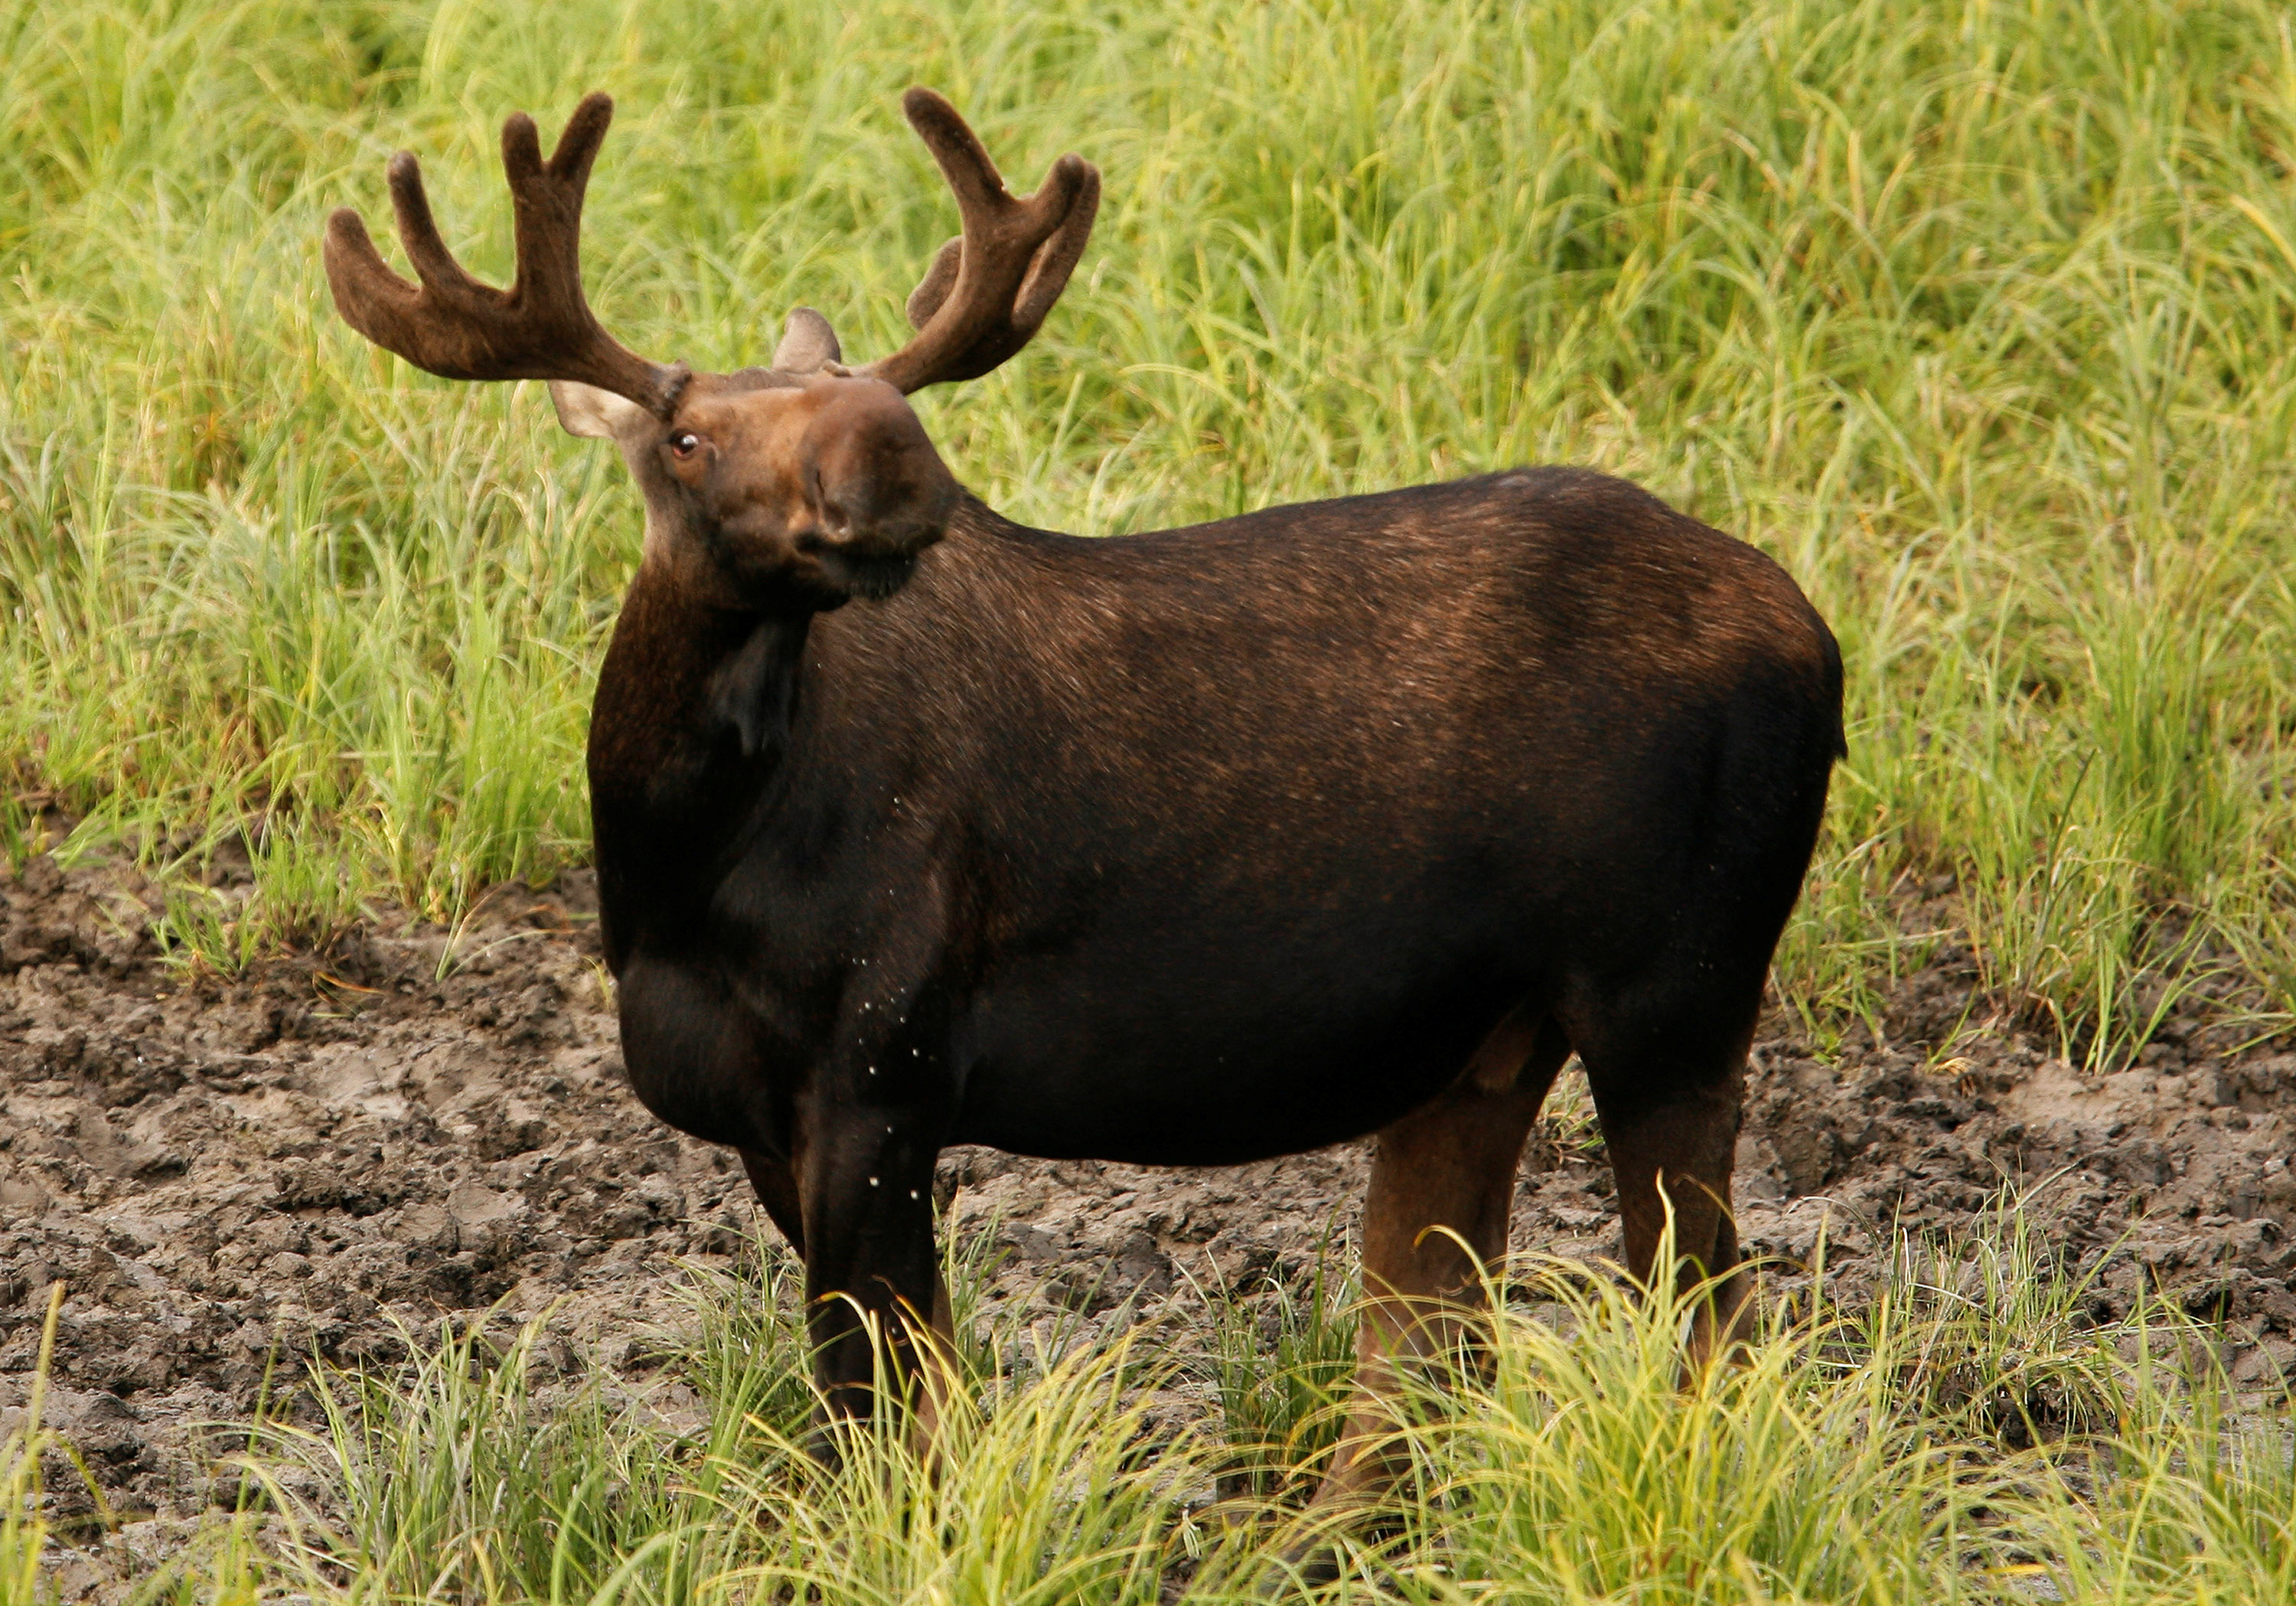 A bull moose looks up while grazing in a field near Anchorage, Alaska on August 5, 2008. REUTERS/Lucas Jackson